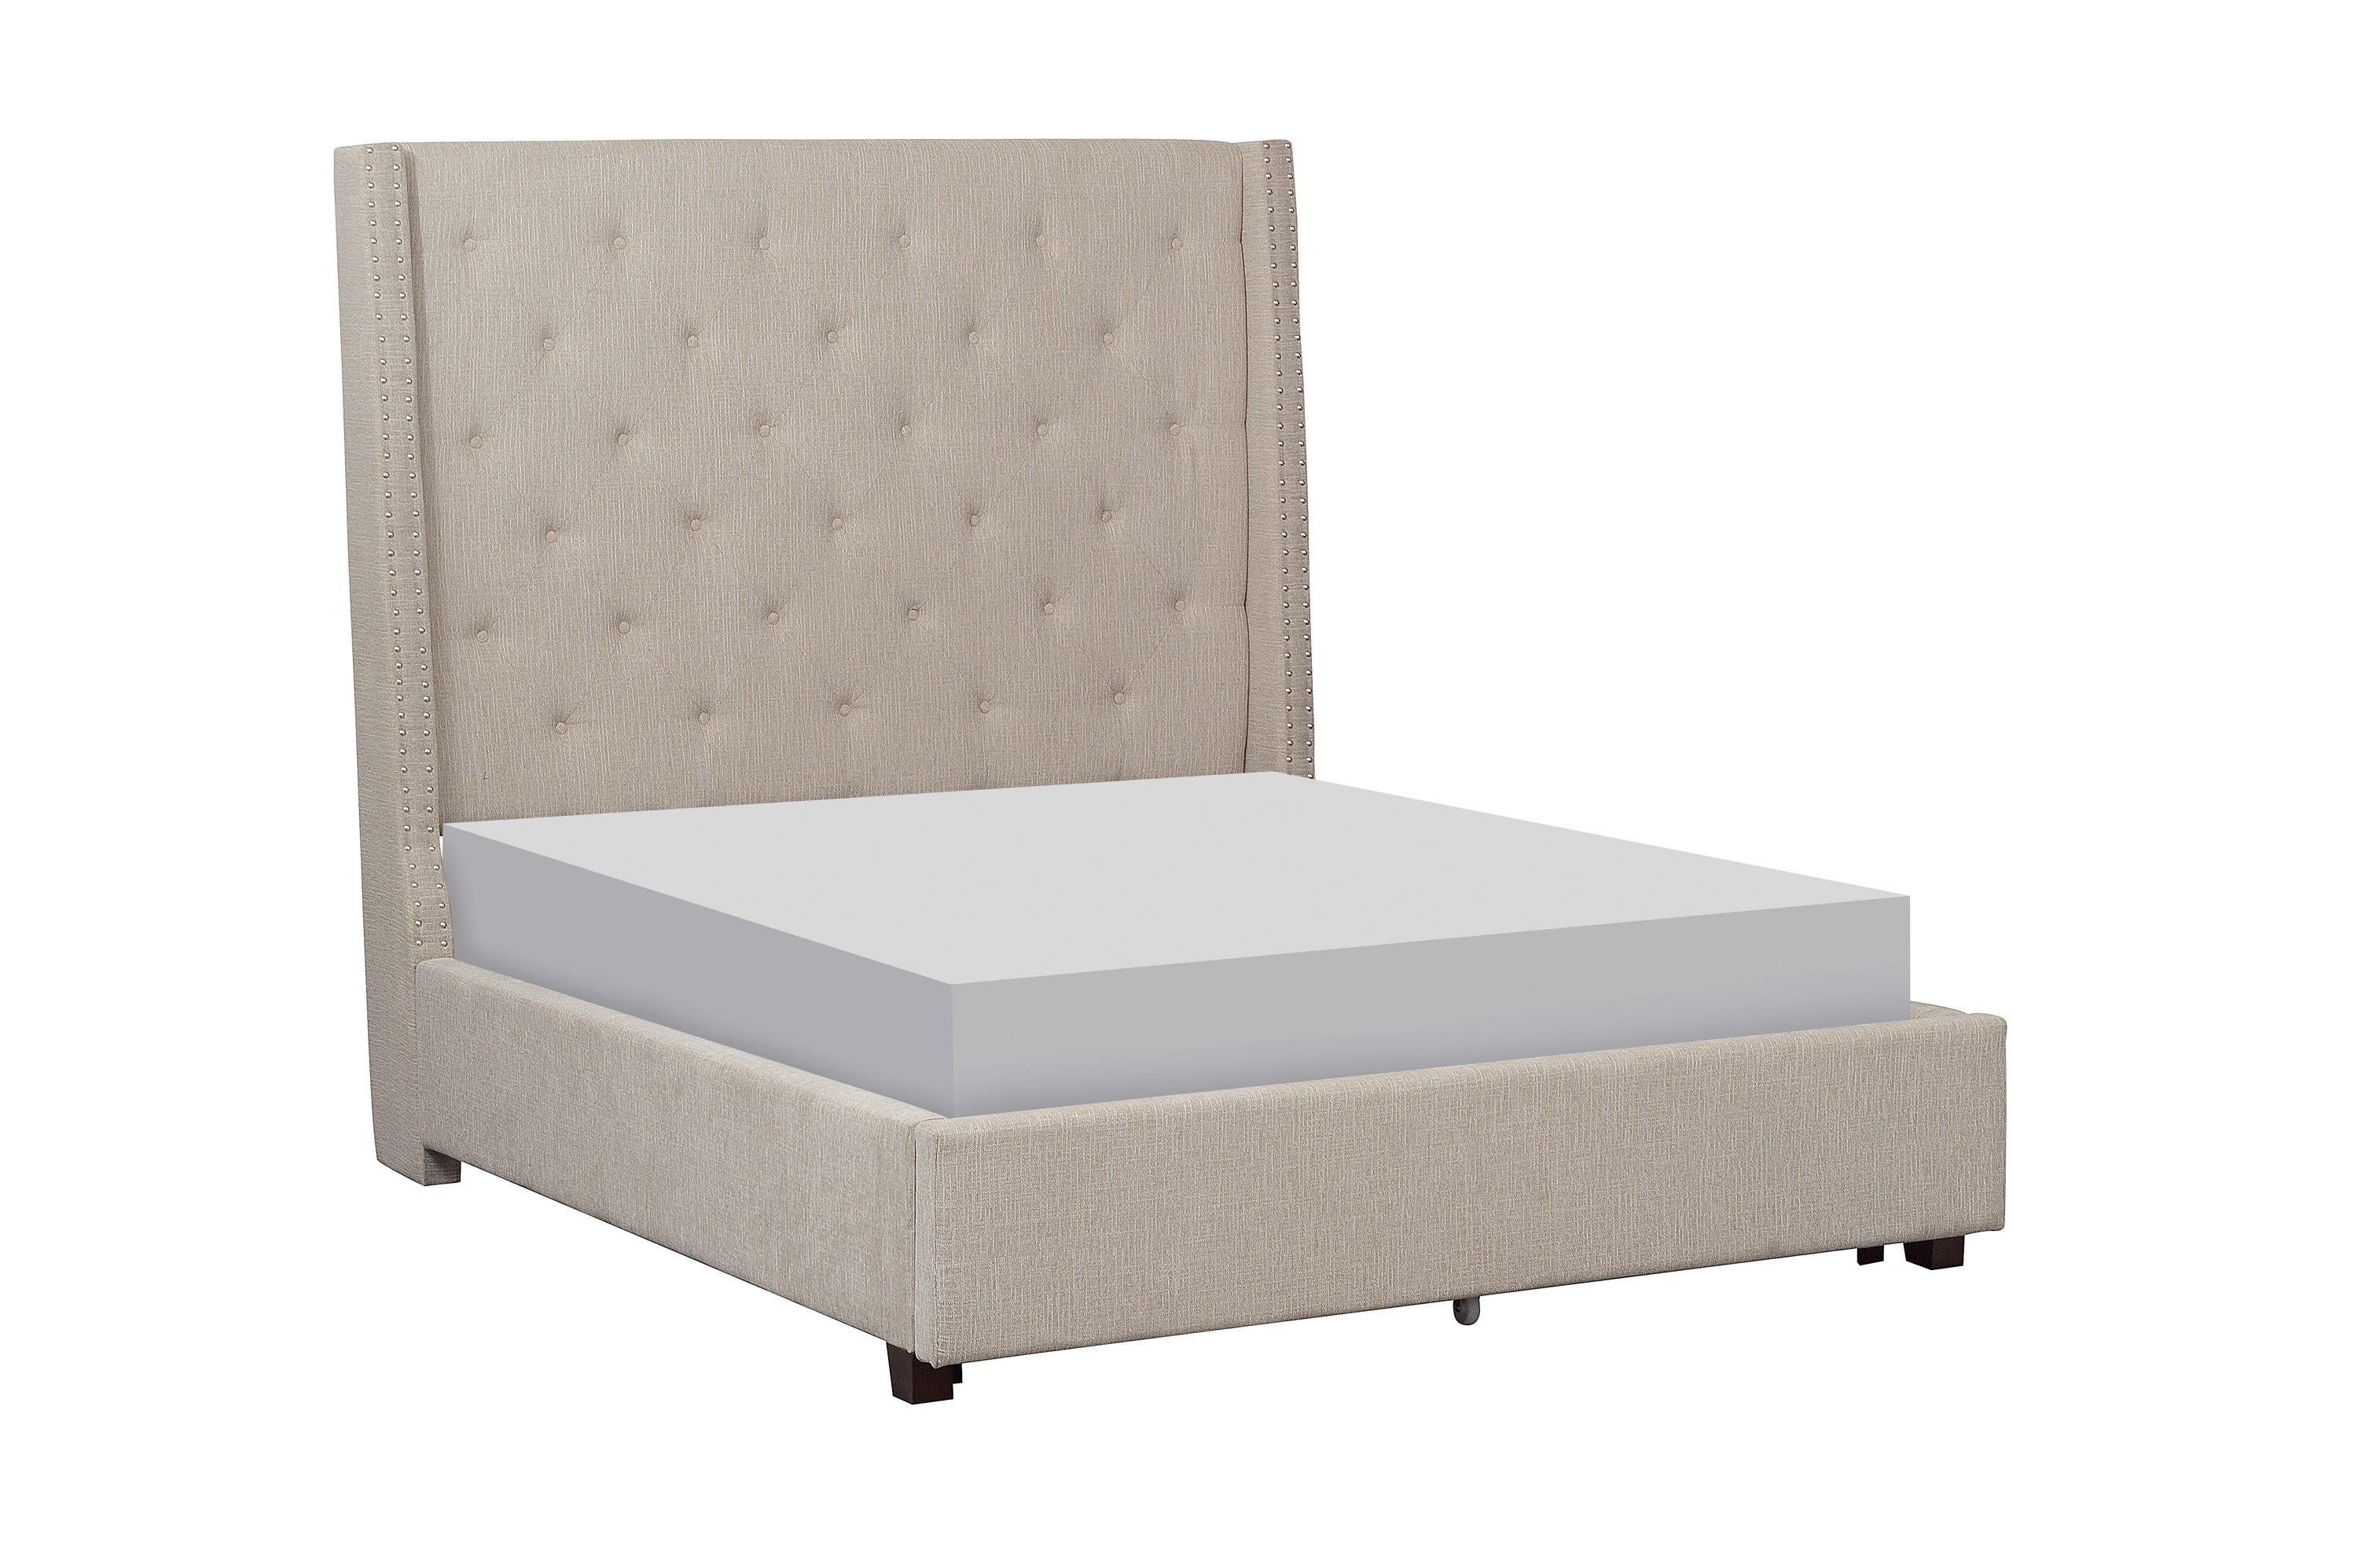 Modern Bed 5877FBE-1* Fairborn 5877FBE-1* in Beige Polyester